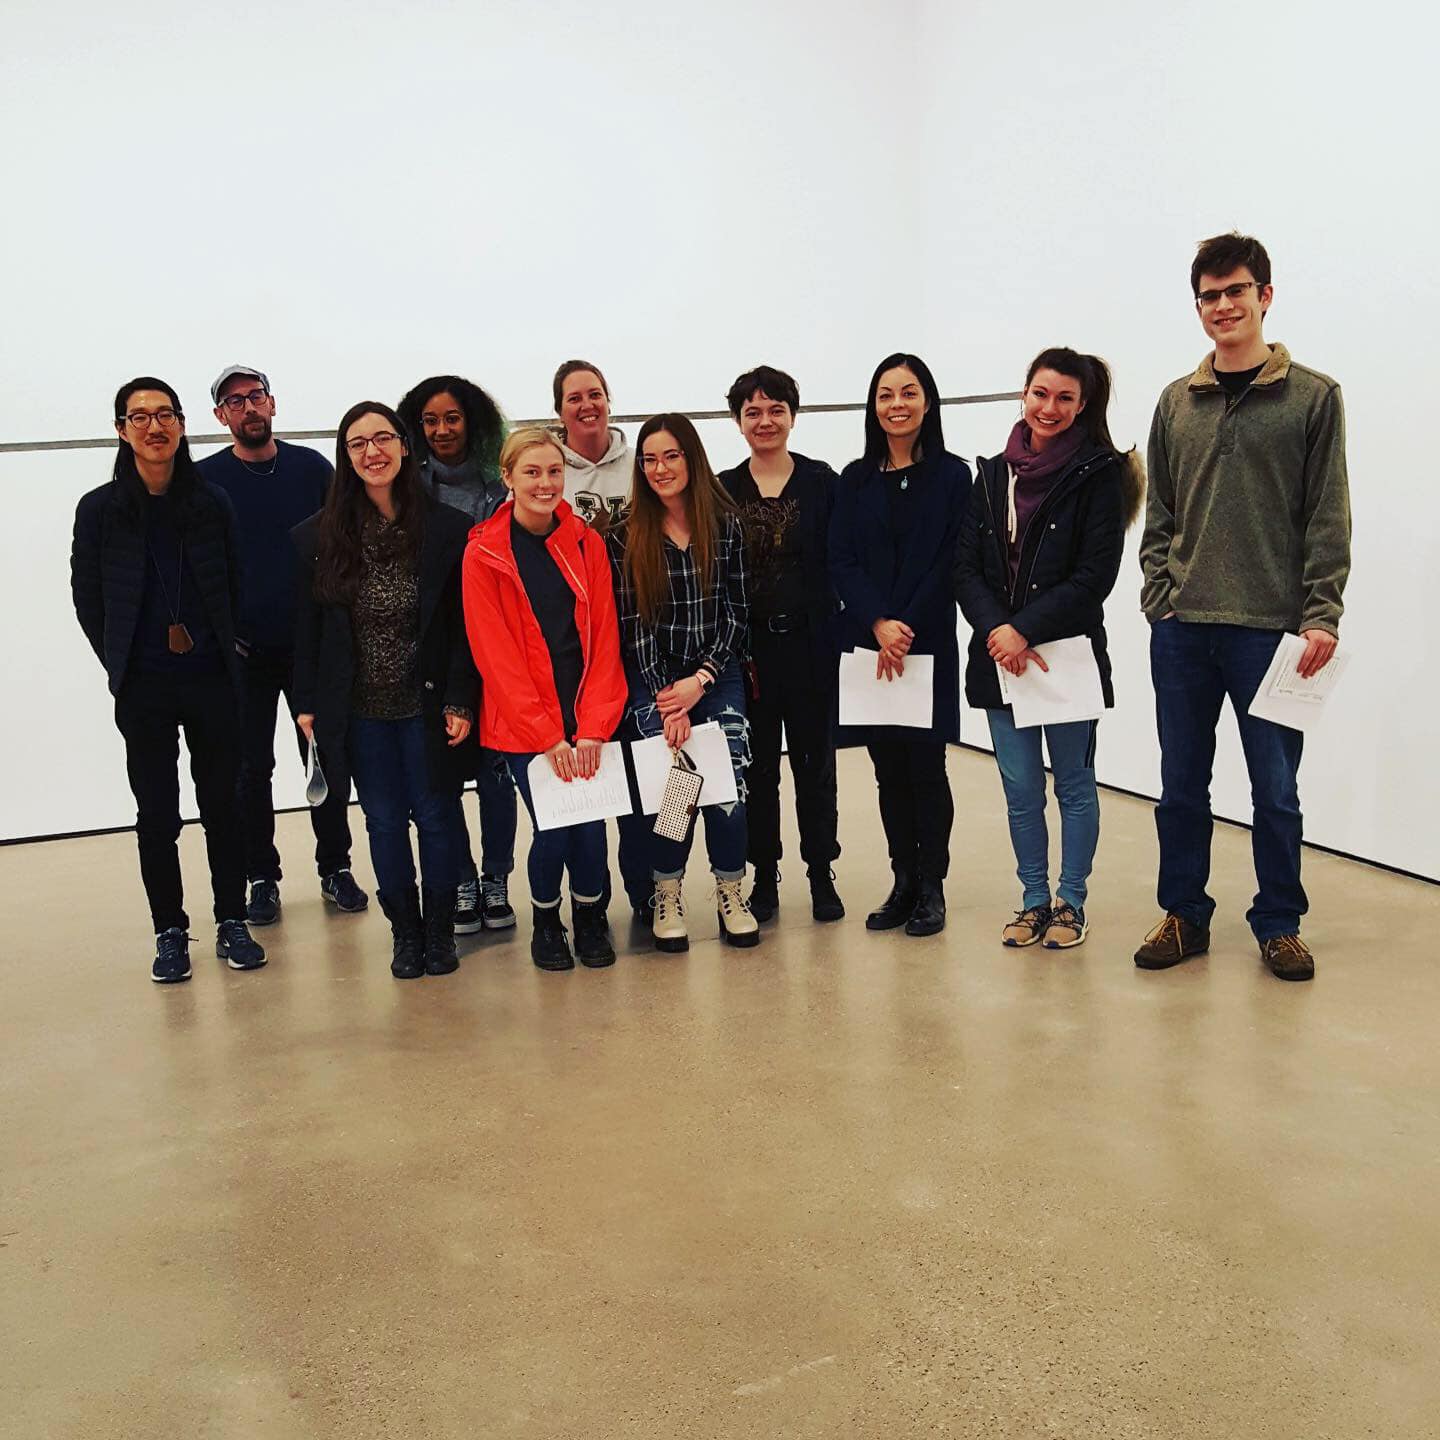 History of Art 4016 Visits Beeler Gallery | Department of History of Art